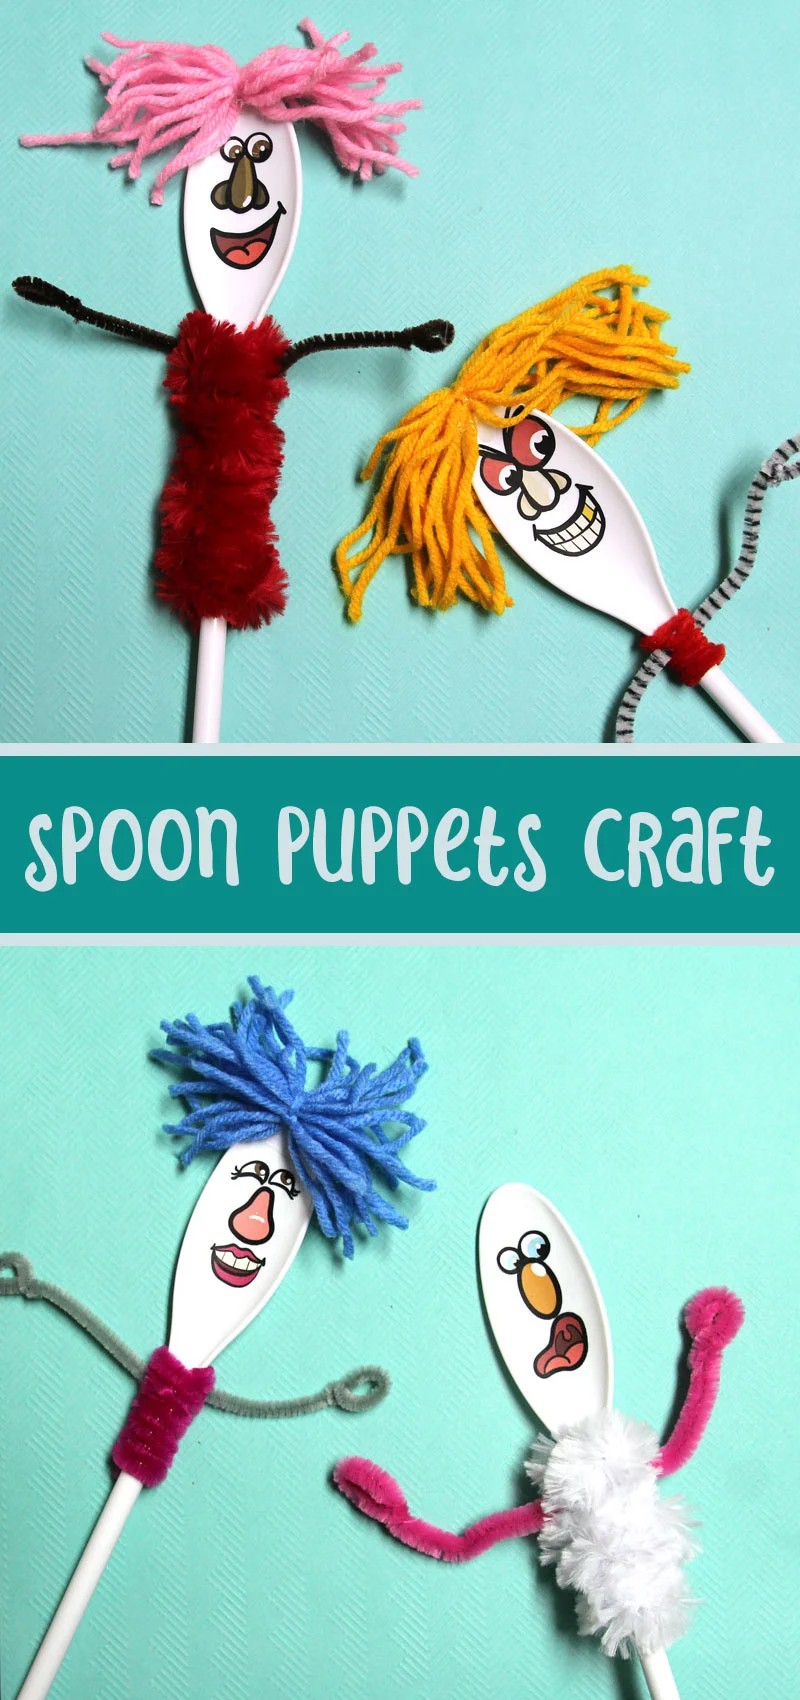 How to make spoon puppets final collage